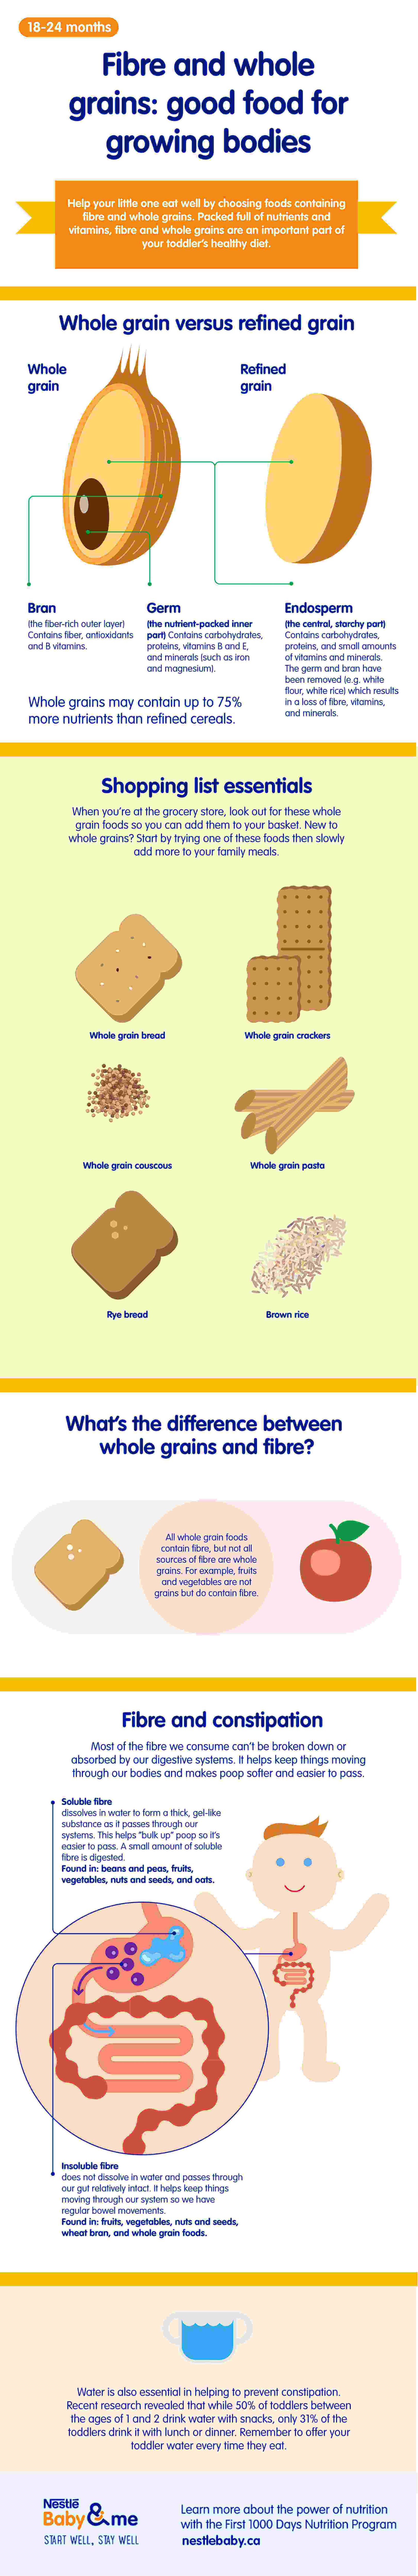 Whole grains and fiber_02_LEARN_Fiber and wholegrains-good food for growing bodies_900px